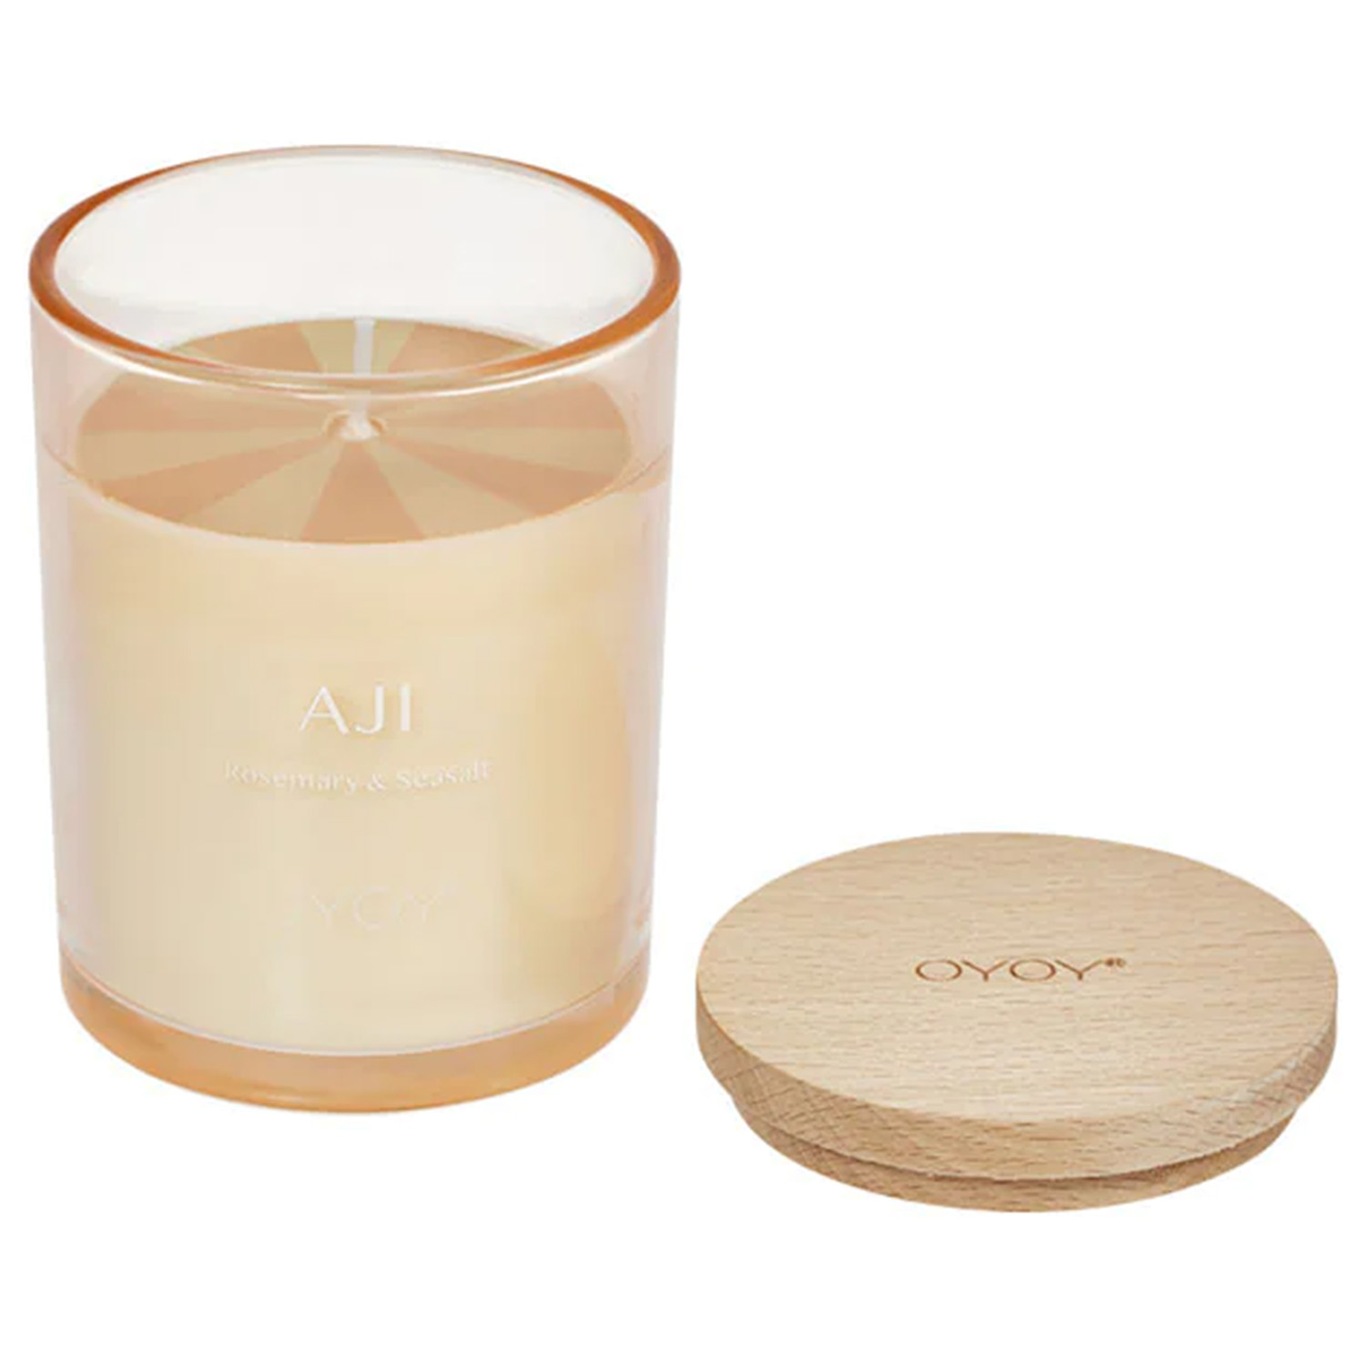 Scented Candle- Aji Duftlys